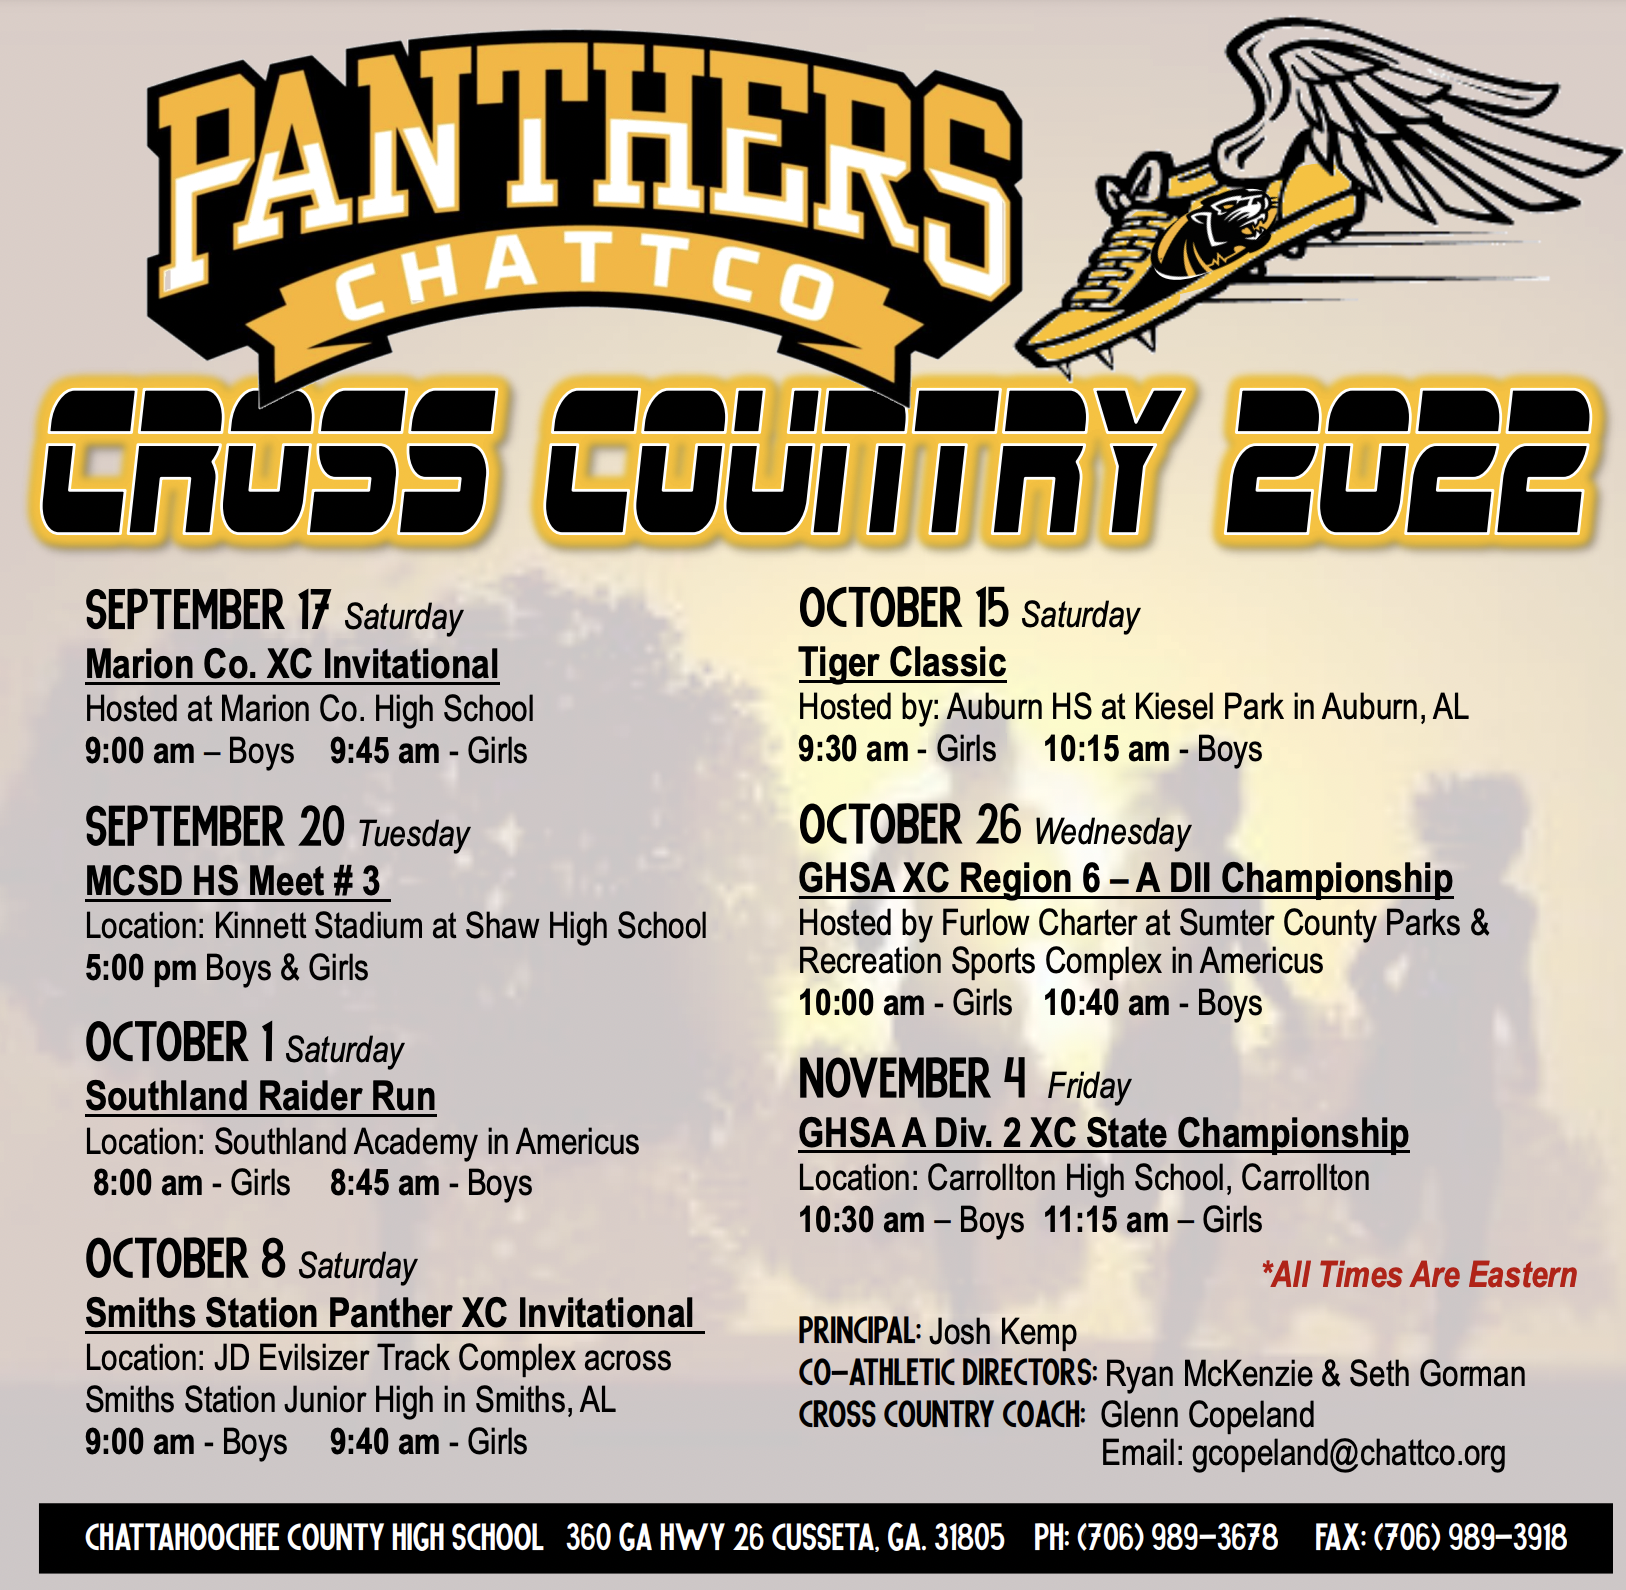 Cross country schedule SEPTEMBER 17 Saturday Marion Co. XC Invitational Hosted at Marion Co. High School 9:00 am – Boys 9:45 am - Girls SEPTEMBER 20 Tuesday MCSD HS Meet # 3 Location: Kinnett Stadium at Shaw High School 5:00 pm Boys & Girls OCTOBER 1 Saturday Southland Raider Run Location: Southland Academy in Americus 8:00 am - Girls 8:45 am - Boys OCTOBER 8 Saturday Smiths Station Panther XC Invitational Location: JD Evilsizer Track Complex across Smiths Station Junior High in Smiths, AL 9:00 am - Boys 9:40 am - Girls OCTOBER 15 Saturday Tiger Classic Hosted by: Auburn HS at Kiesel Park in Auburn, AL 9:30 am - Girls 10:15 am - Boys OCTOBER 26 Wednesday GHSA XC Region 6 – A DII Championship Hosted by Furlow Charter at Sumter County Parks & Recreation Sports Complex in Americus 10:00 am - Girls 10:40 am - Boys NOVEMBER 4 Friday GHSA A Div. 2 XC State Championship Location: Carrollton High School, Carrollton 10:30 am – Boys 11:15 am – Girls *All Times Are Eastern Principal: Josh Kemp Co-Athletic Directors: Ryan McKenzie & Seth Gorman Cross Country Coach: Glenn Copeland  Email: gcopeland@chattco.org Chattahoochee County High school 360 Ga Hwy 26 Cusseta, GA. 31805 PH: (706) 989-3678 Fax: (706) 989-3918